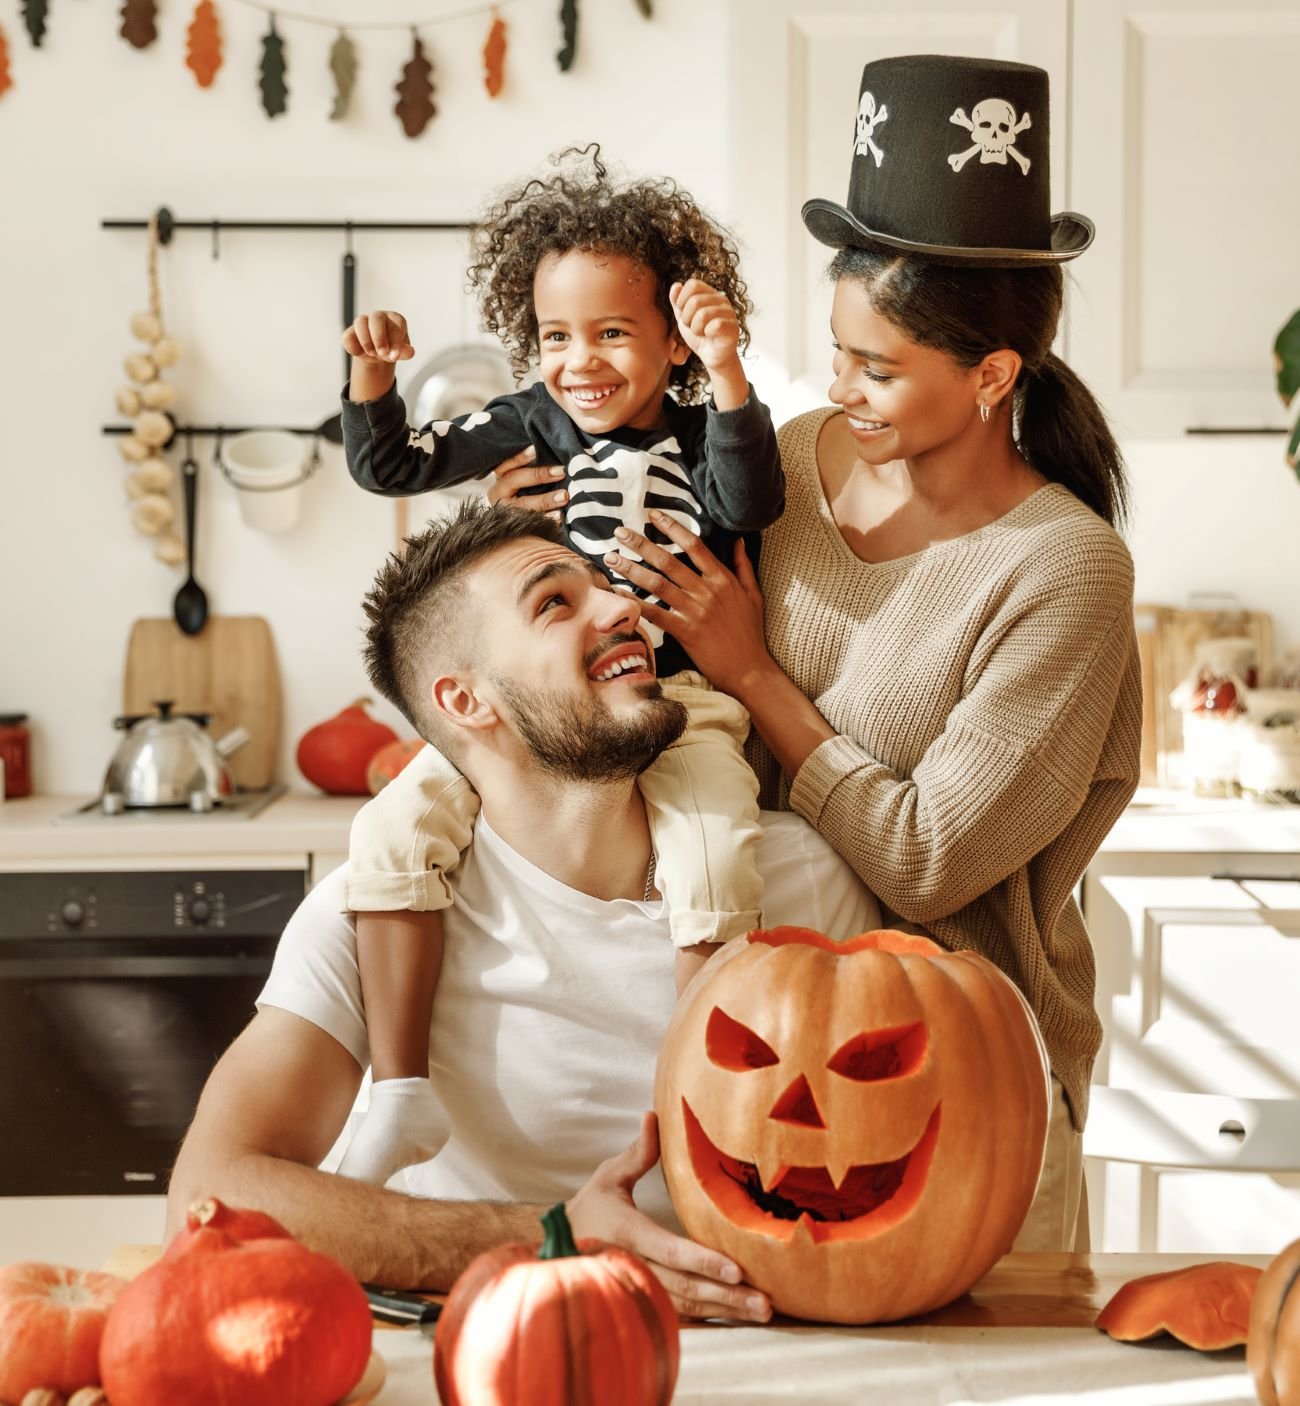 A family in their kitchen, parents and child gathered around a table, happily carving pumpkins for Halloween.